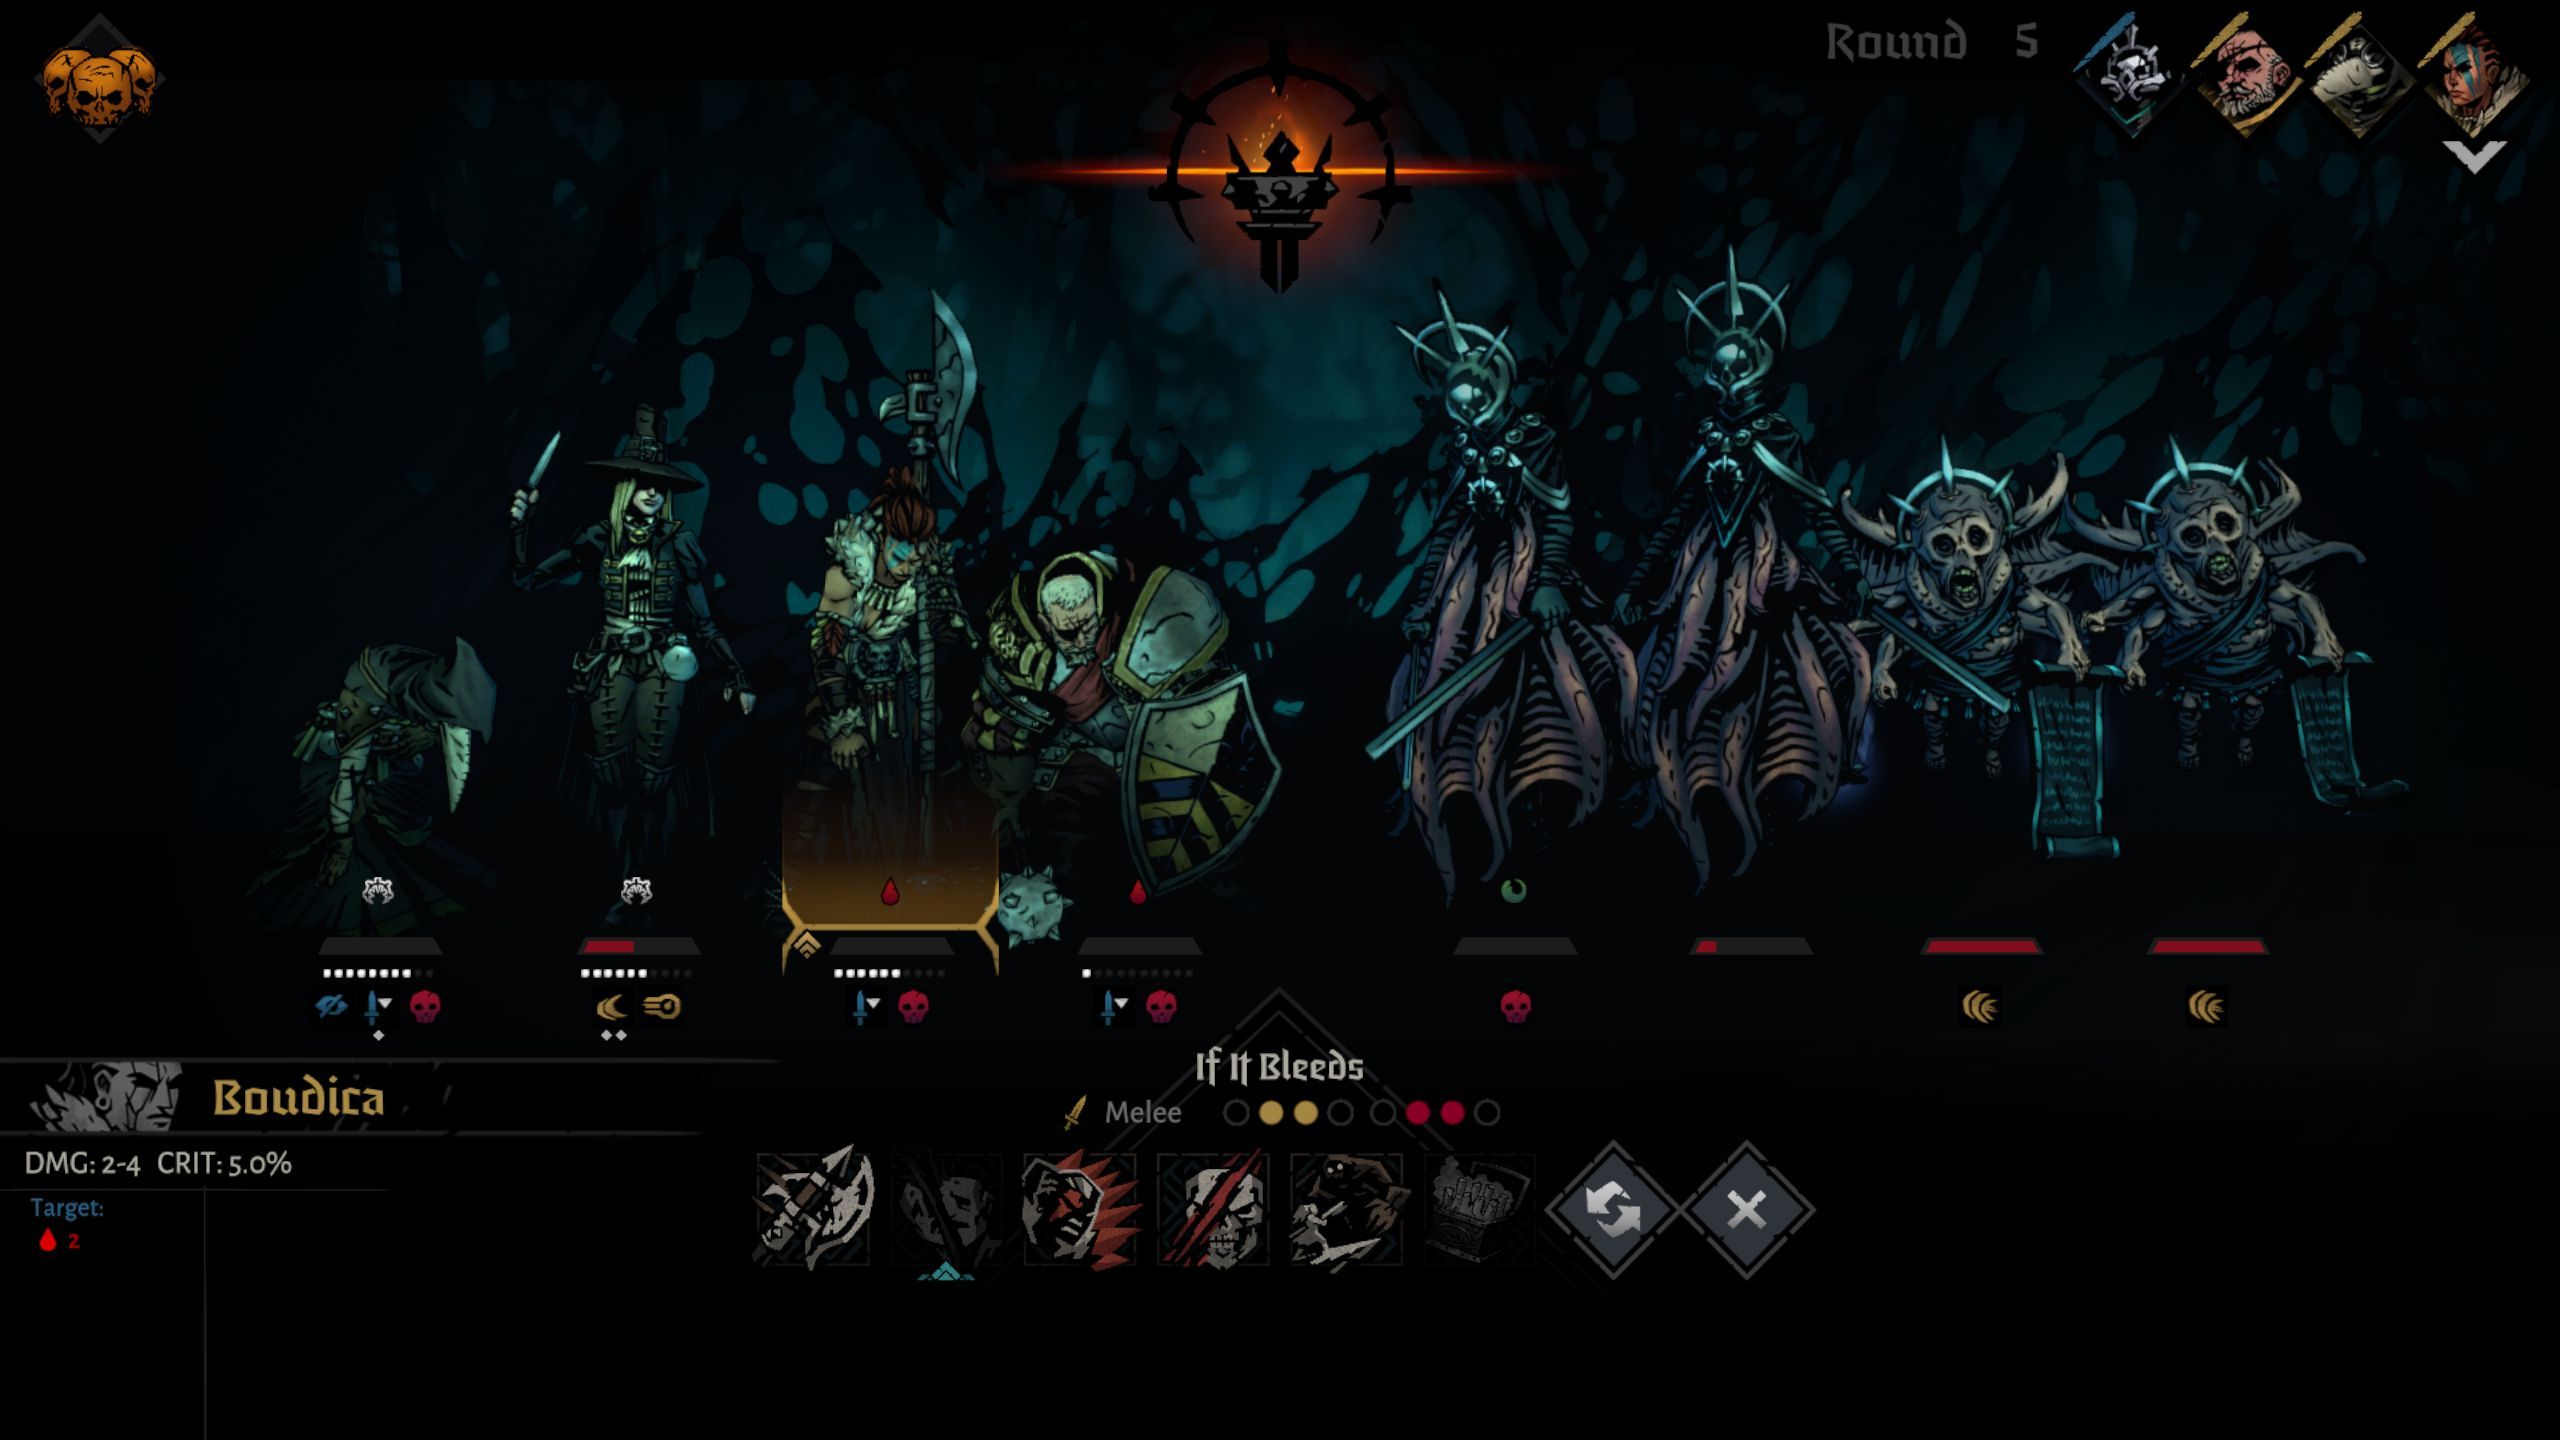 The torch of hope goes out during battle in Darkest Dungeon 2